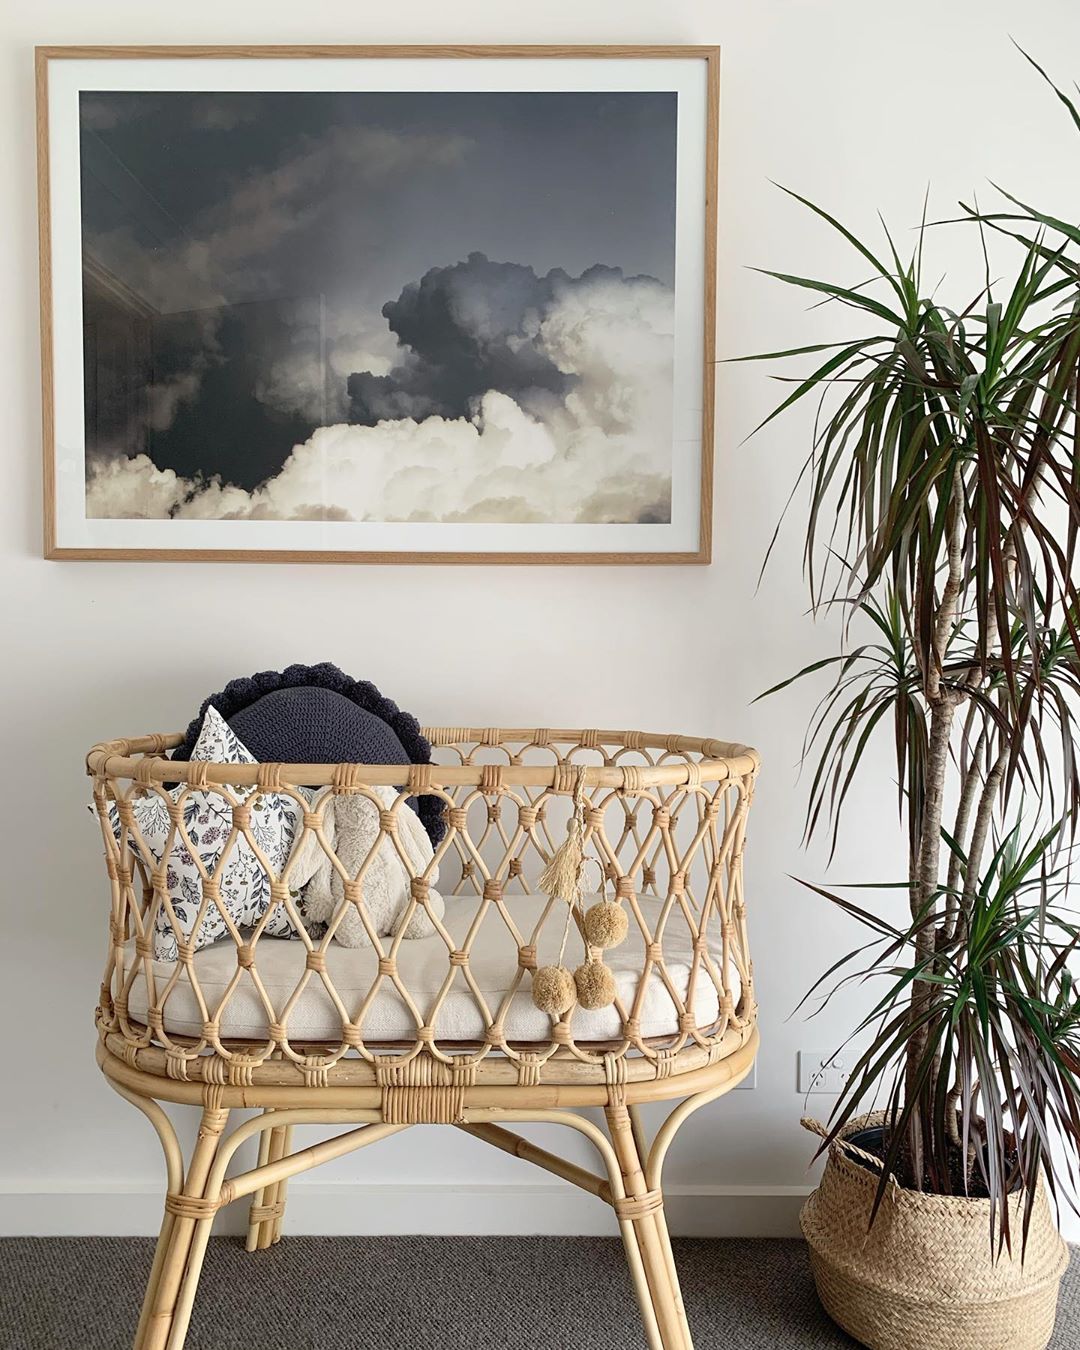 Bassinet under painting next to plant. Photo by Instagram user @derived_by_design